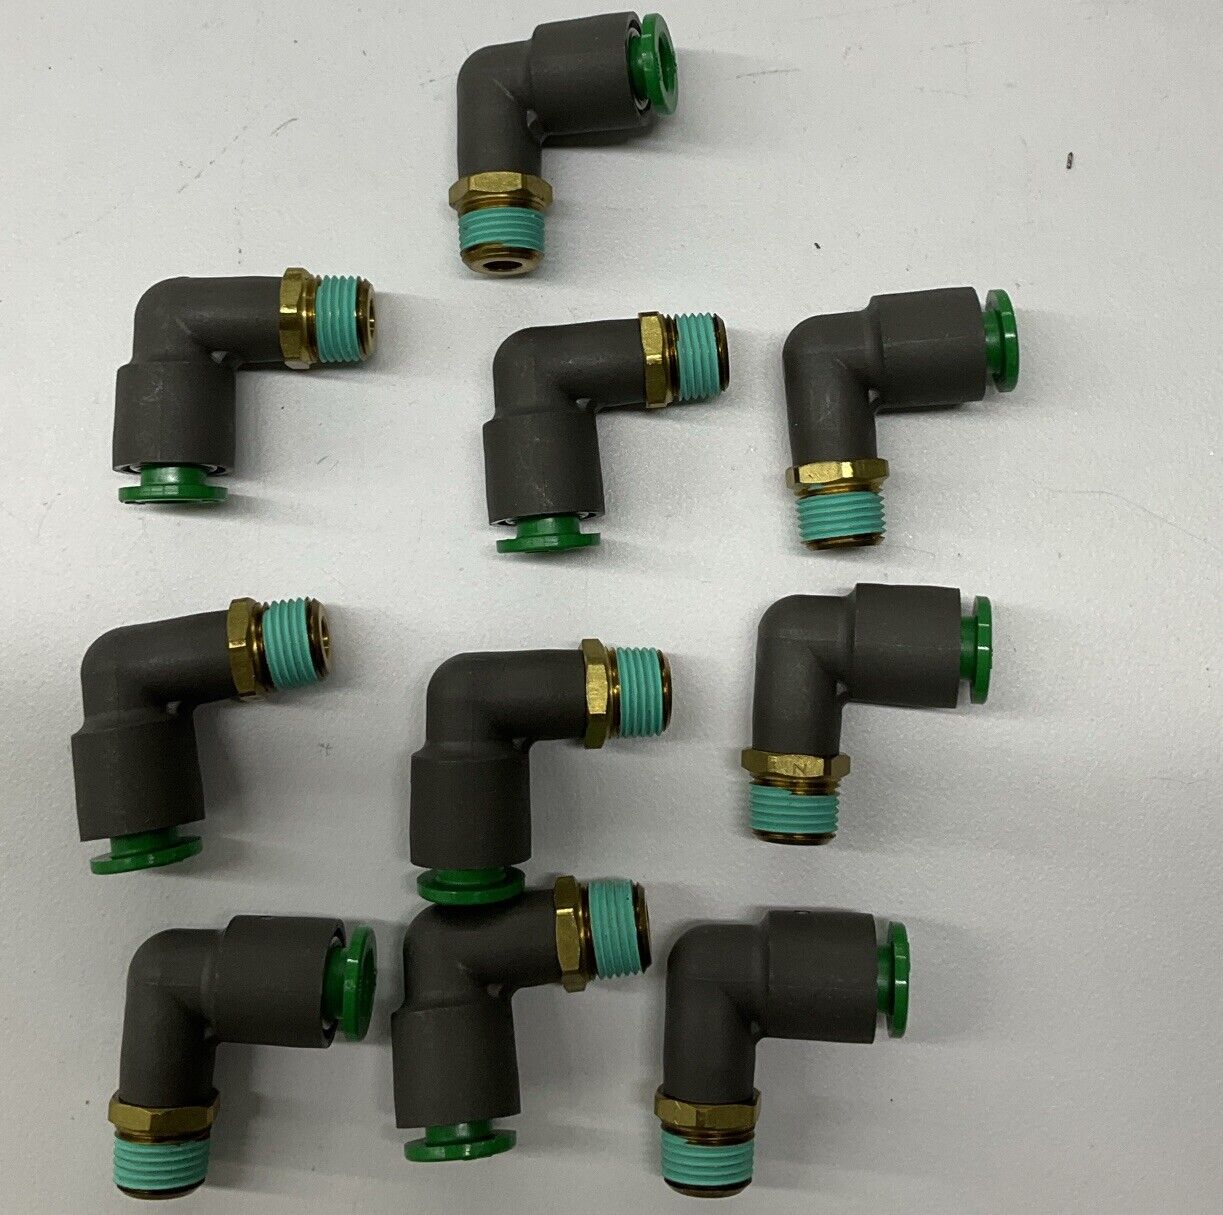 SMC KRL07-34S Bag of 10 90 Degree Push-to-connect Fittings (RE122)